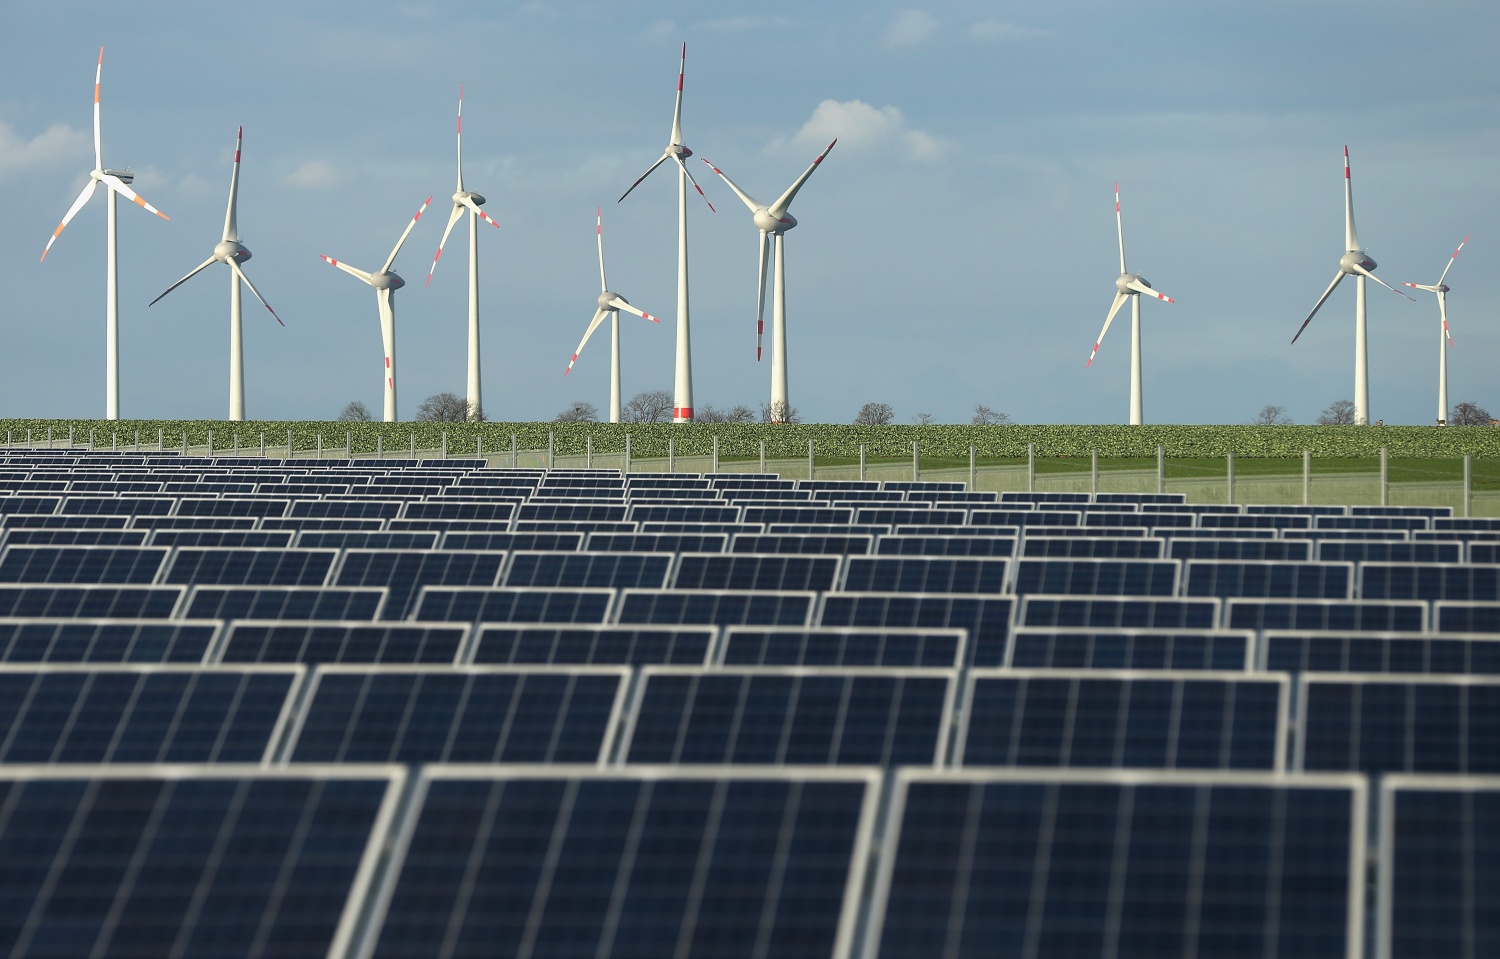 Germany Hastens Transition to Greener Energy